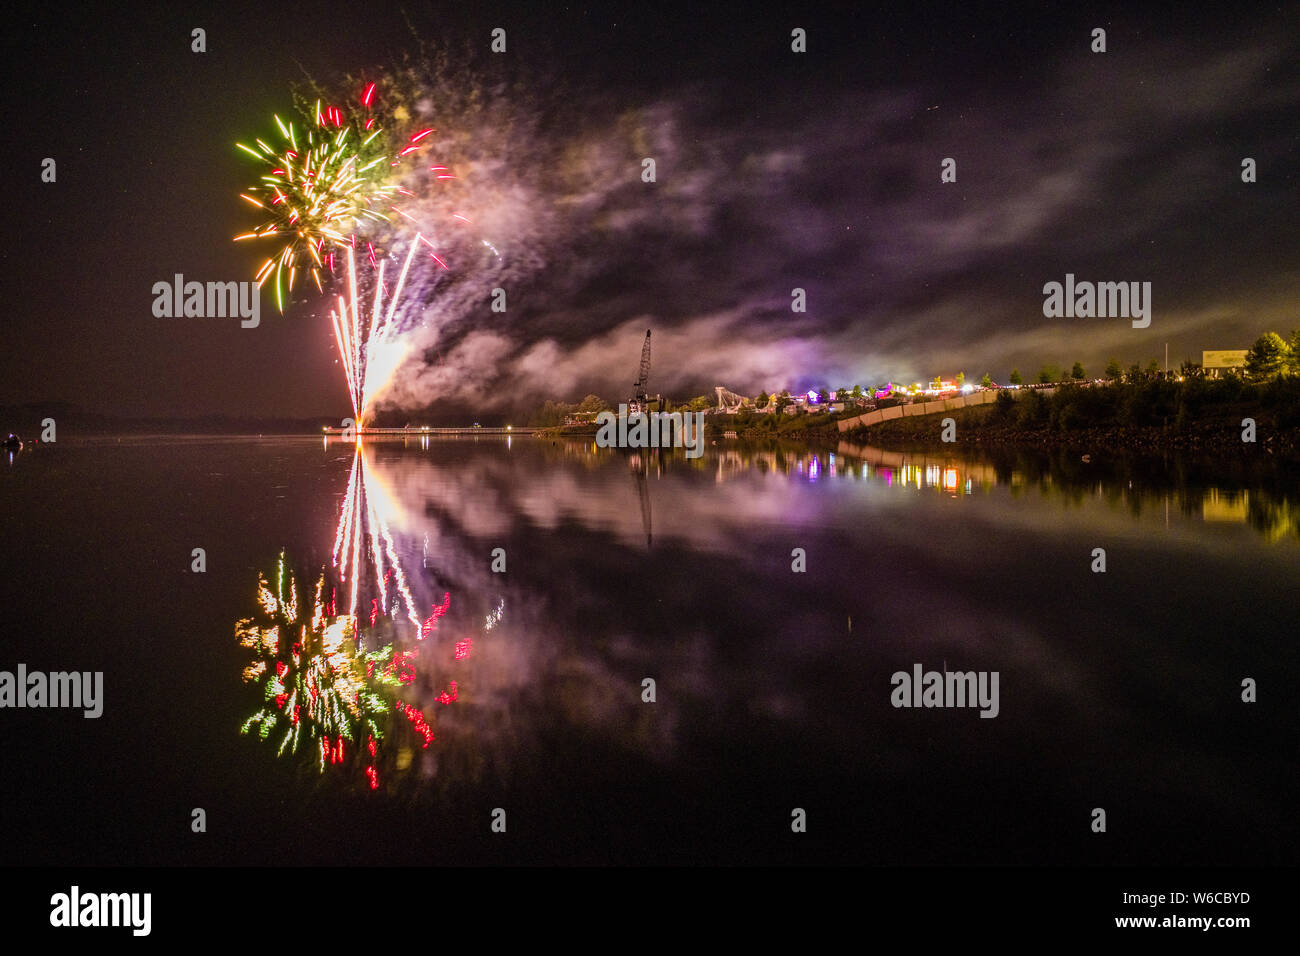 Colorful fireworks are reflected in a lake at night Stock Photo